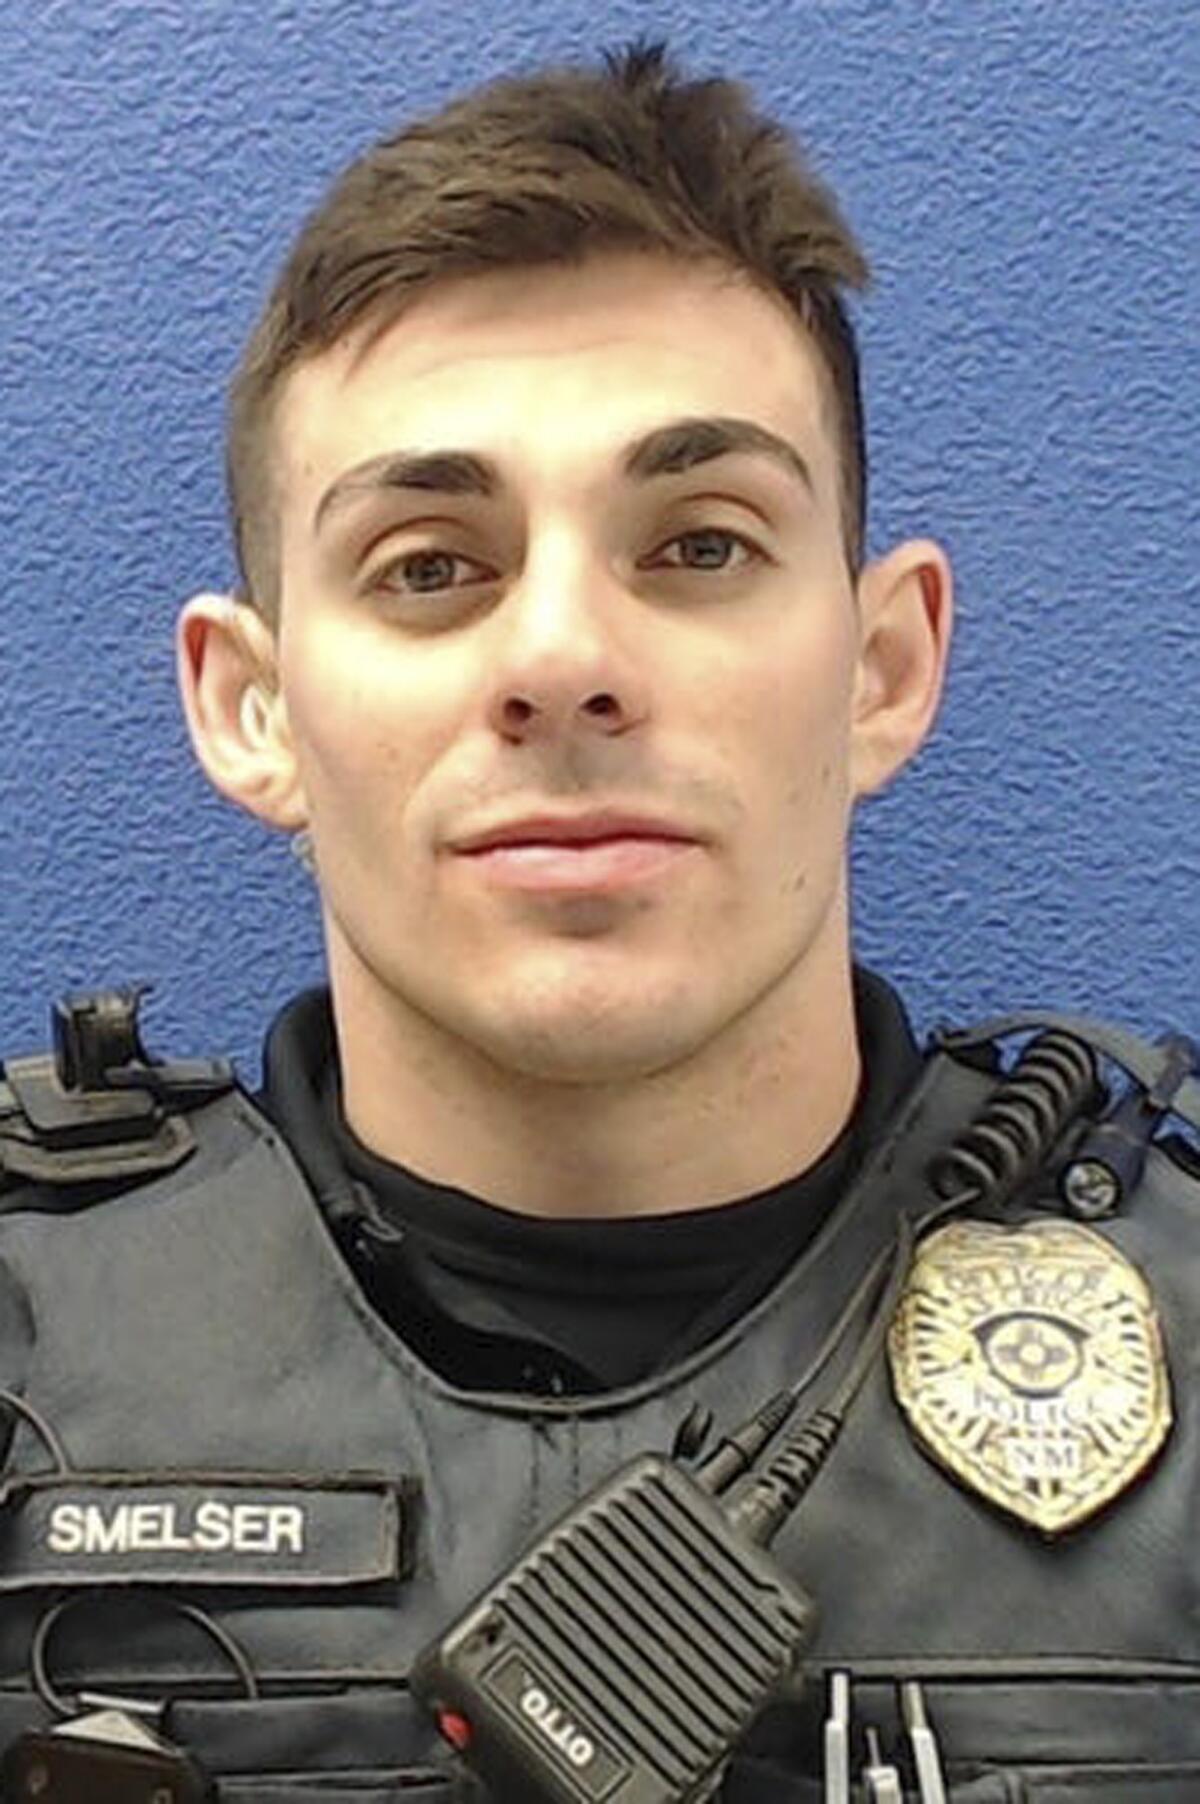 FILE - This undated photo provided by the Las Cruces Police Department shows former police officer Christopher Smelser, who went on trial on Monday, July 11, 2022, on a murder charge in the 2020 death of Antonio Valenzuela. (Las Cruces Police Department via AP, File)